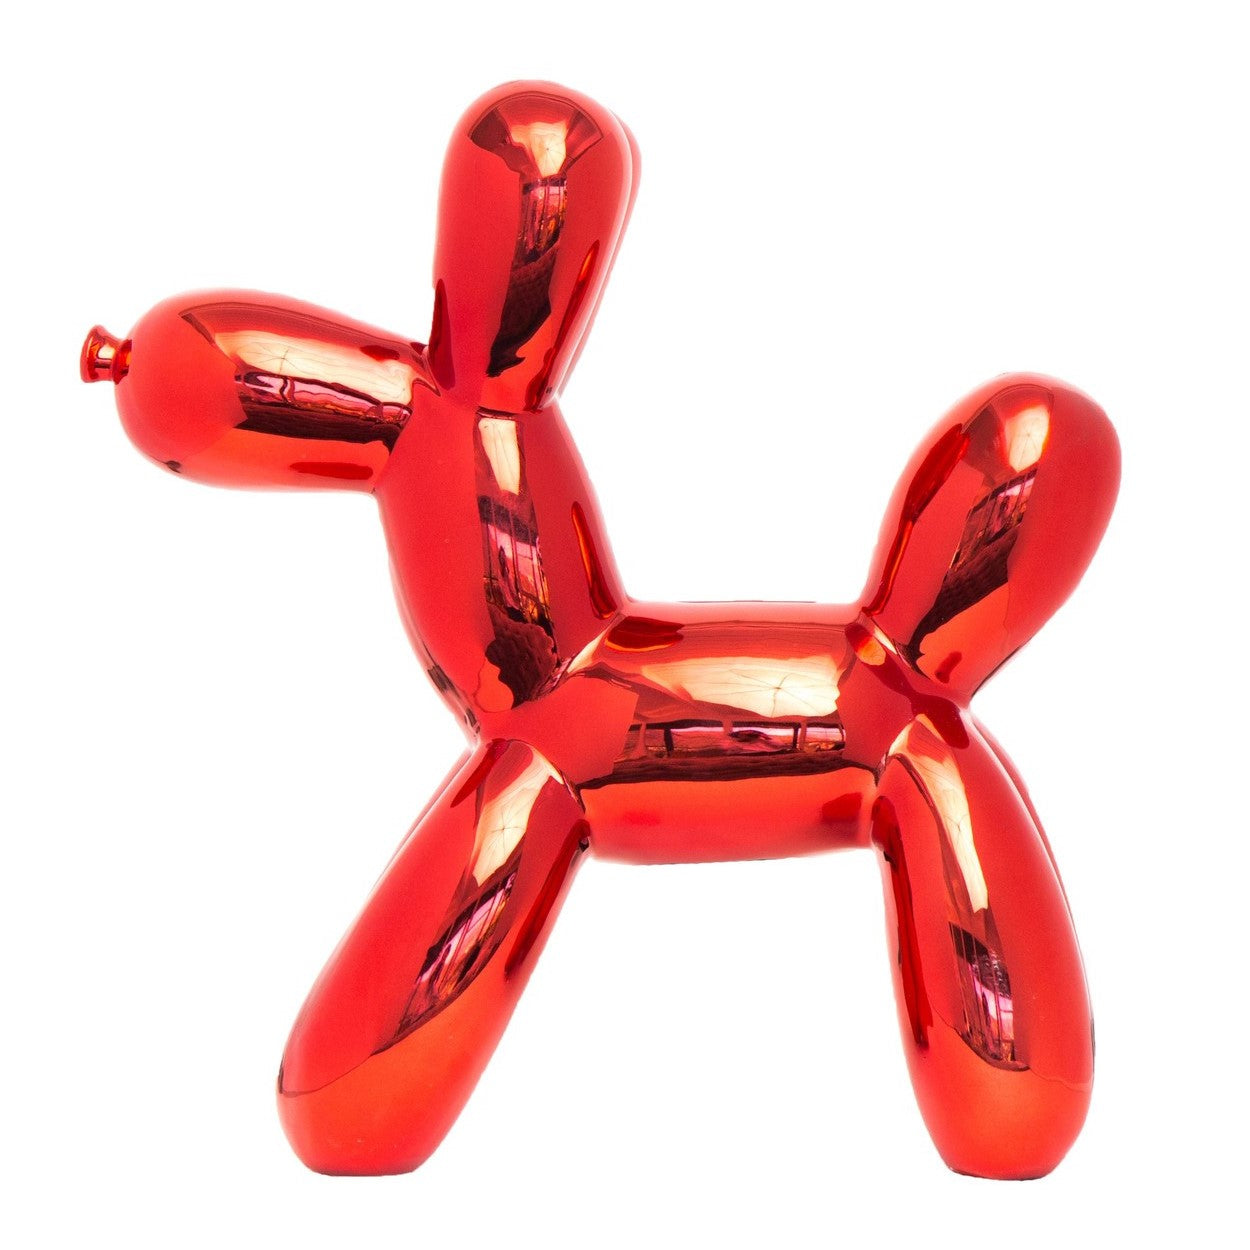 Picture of Mini Balloon Dog, Red